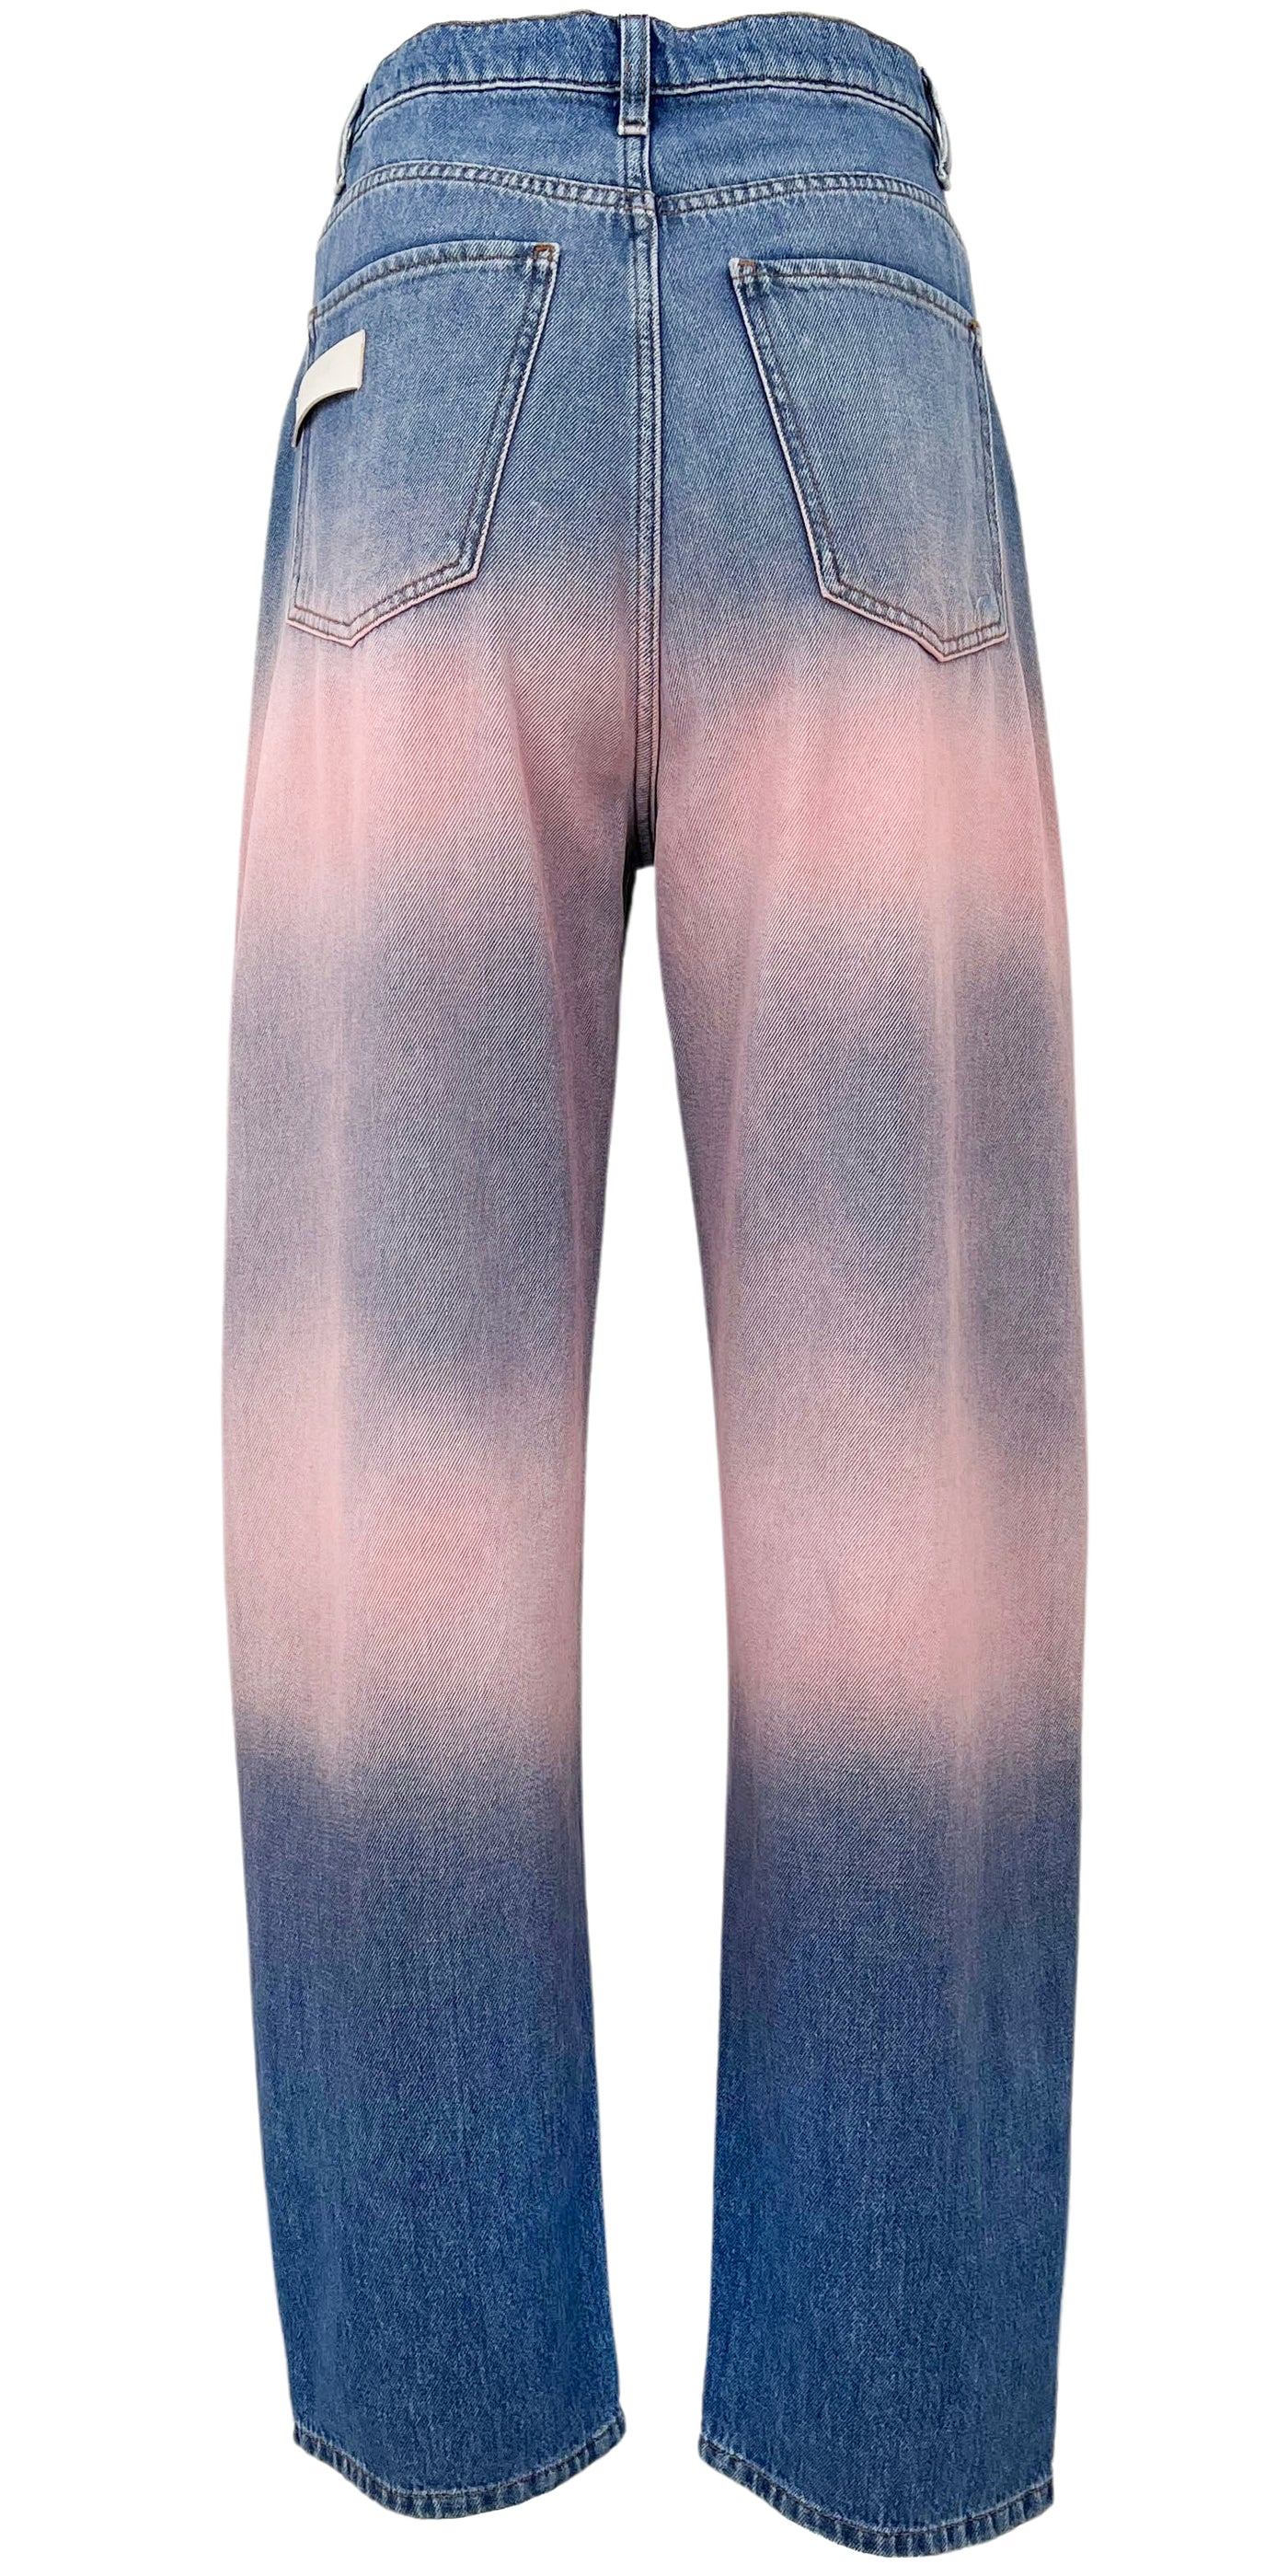 Beatrice High Rise Jeans in Blue and Pink - Discounts on Beatrice at UAL